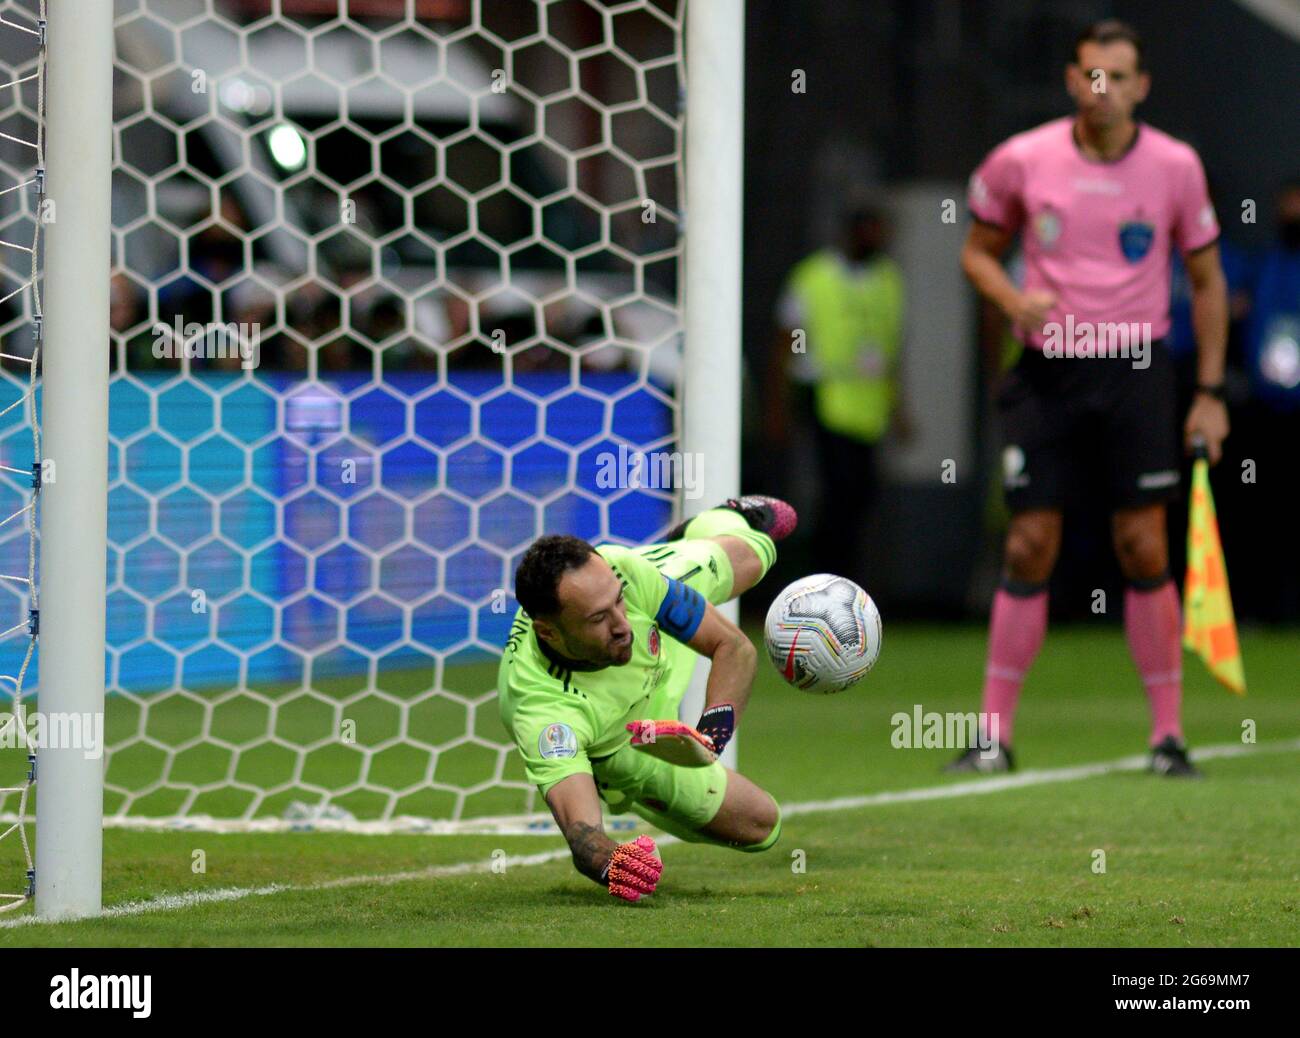 BRASILIA, BRAZIL - JULY 03: Colombia Goalkeeper David Ospina saving a shot by Jose Gimenez of Uruguay in the penalty shootout ,during the Quarterfinal match between Uruguay and Colombia as part of Conmebol Copa America Brazil 2021 at Mane Garrincha Stadium on July 3, 2021 in Brasilia, Brazil. (MB Media) Stock Photo